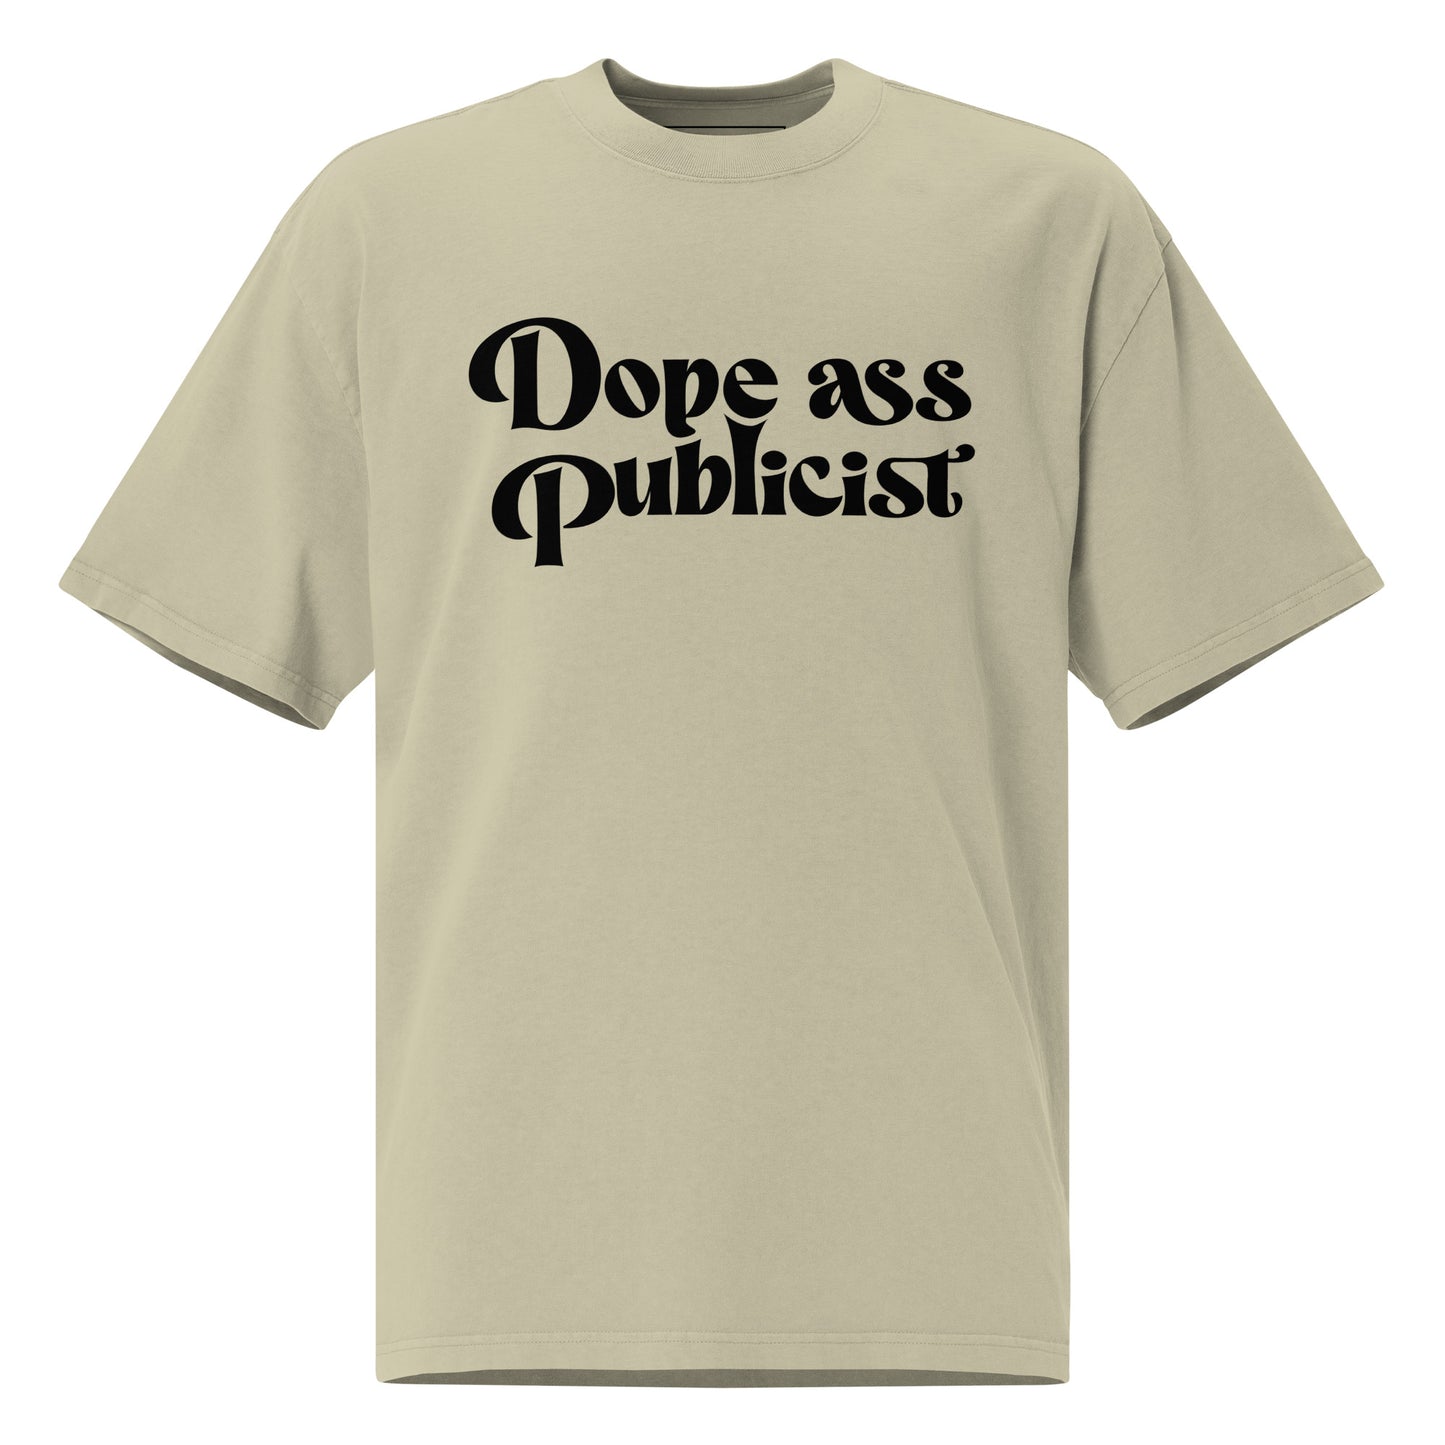 Dope Ass Publicist Printed Oversized faded t-shirt